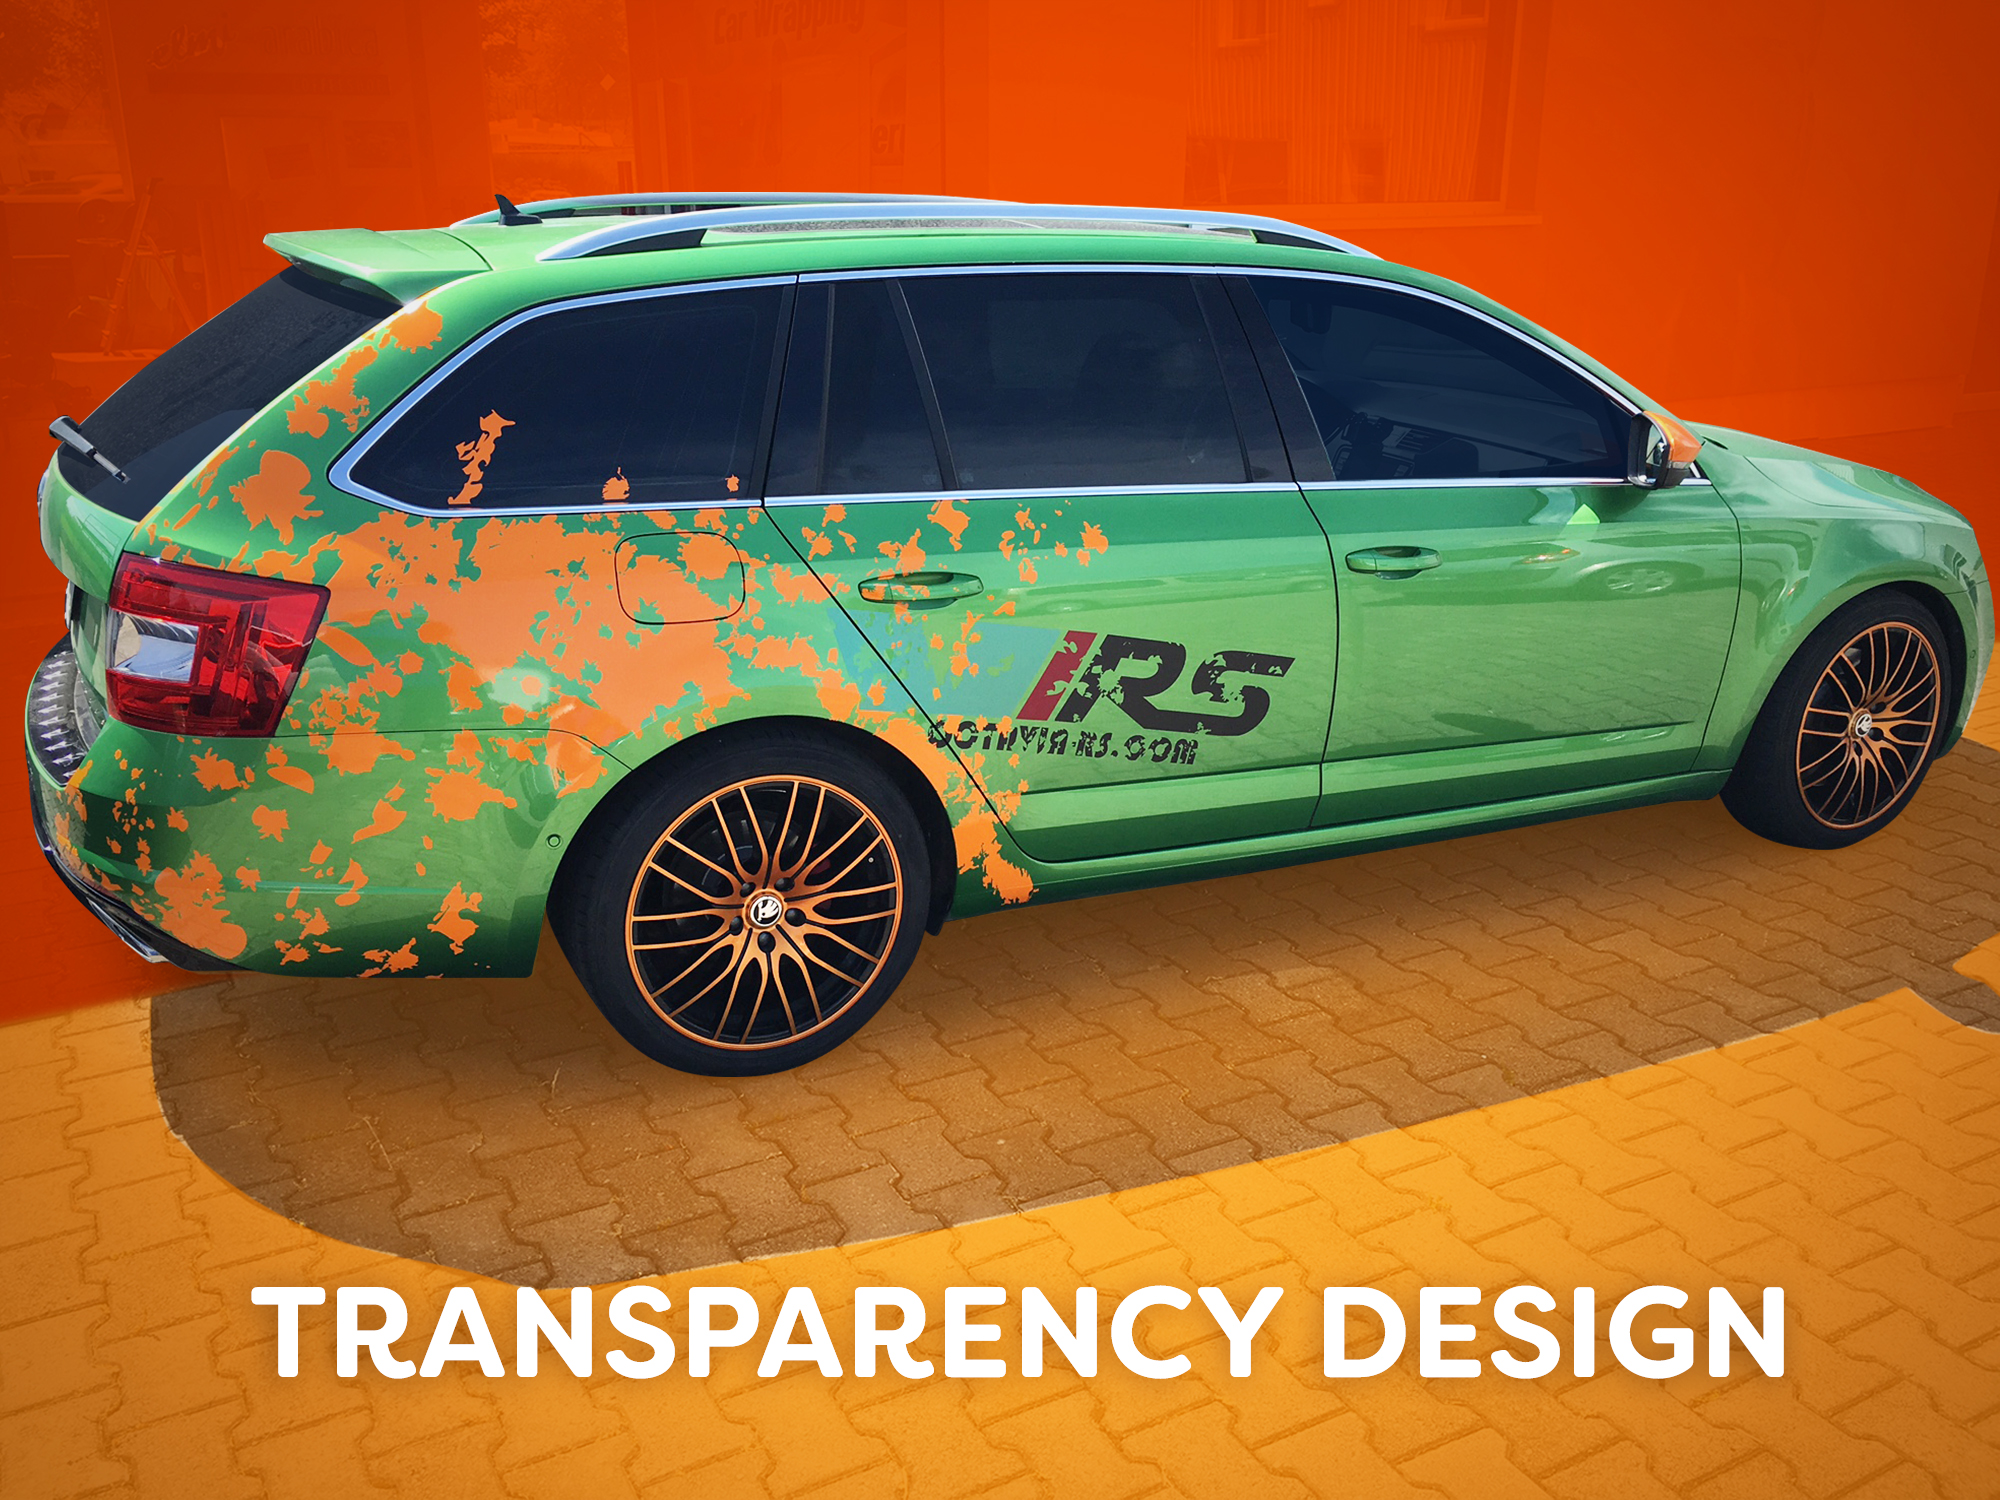 TRANSPARENCY DESIGN & LABELING FOR AUTOMOBILIES